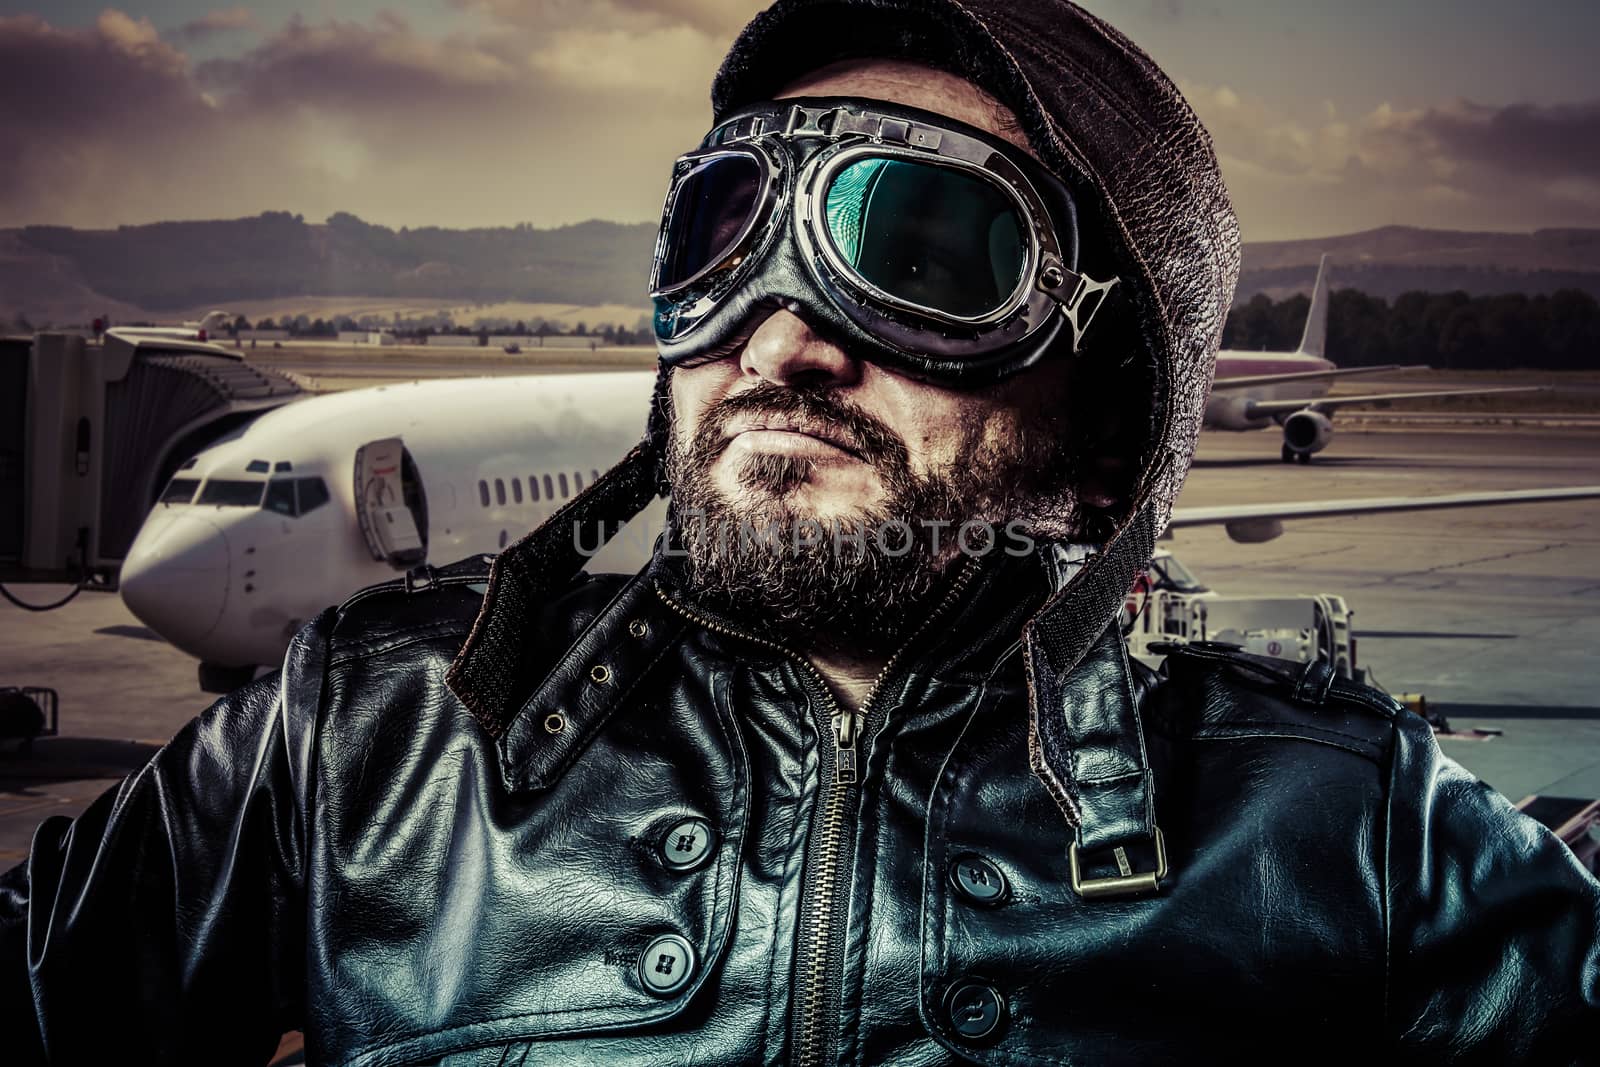 Pride pilot with black leather jacket and old glasses